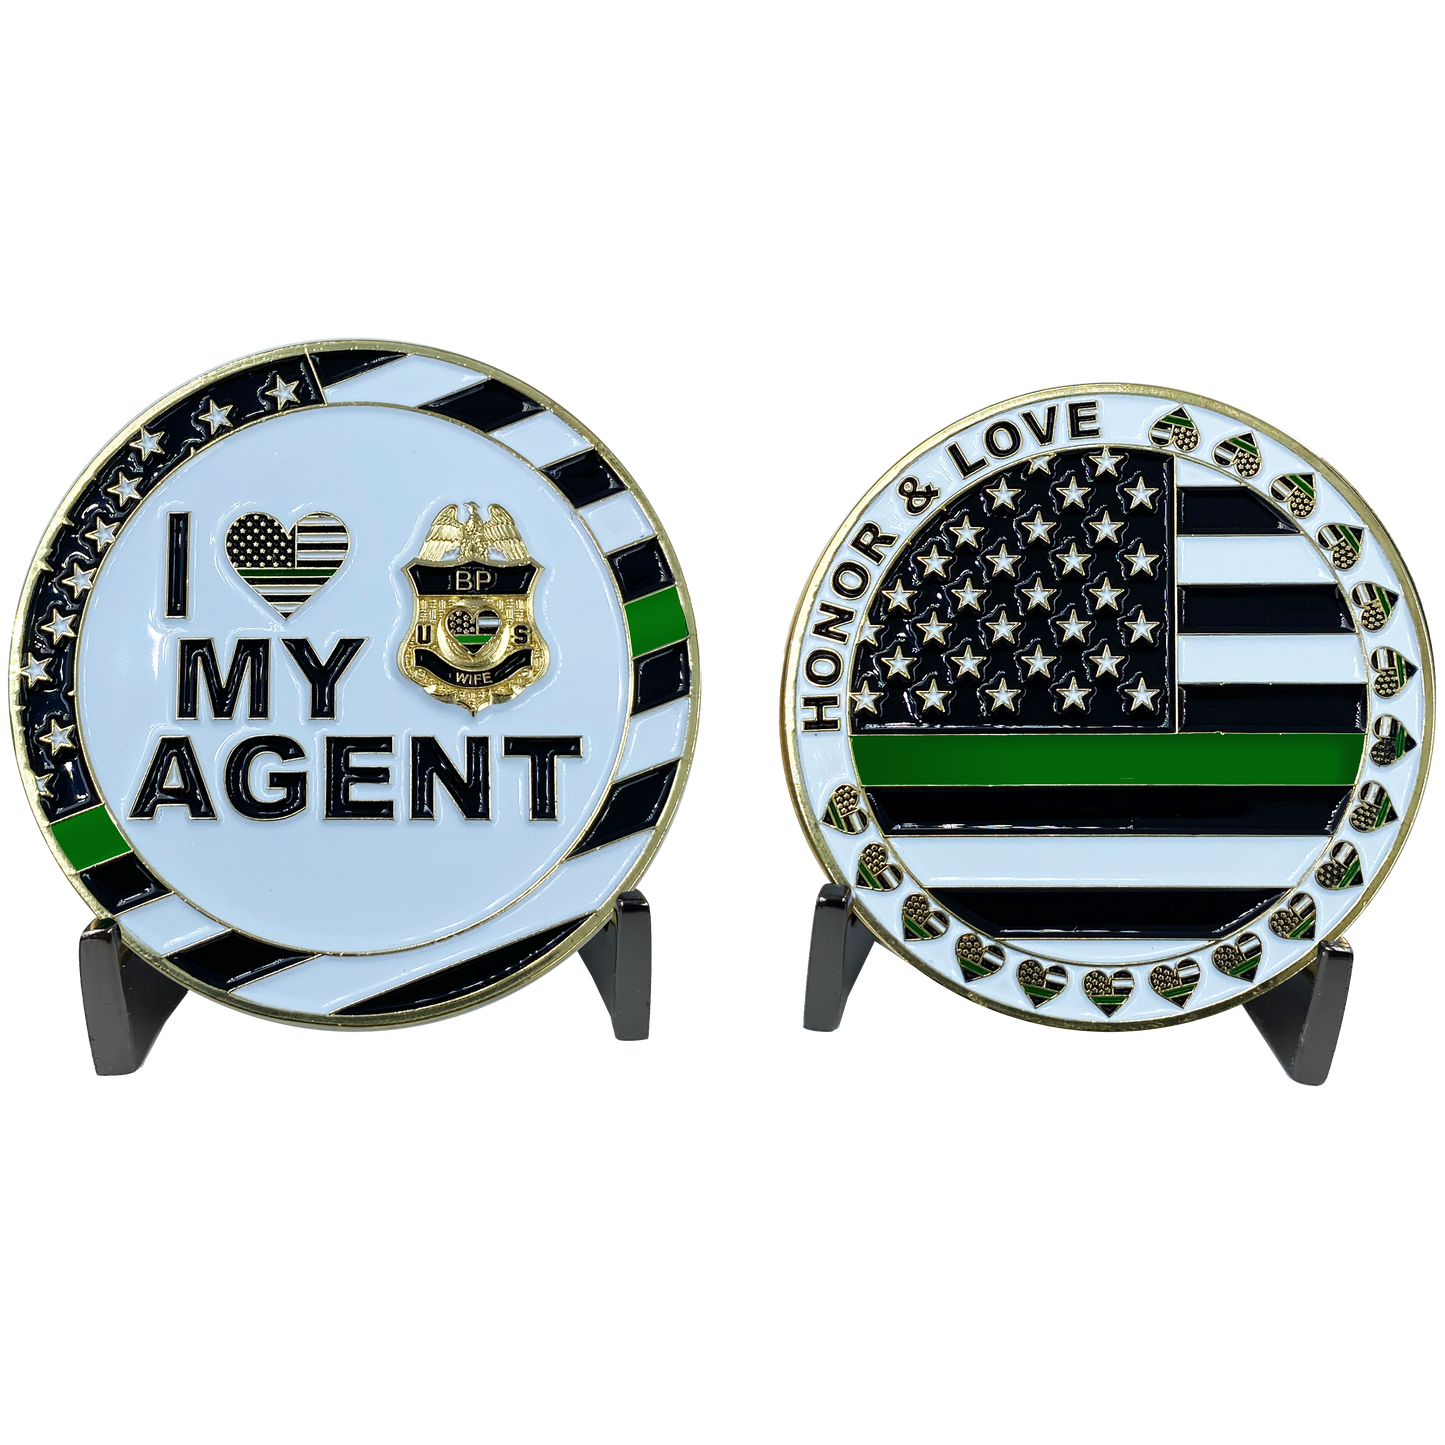 CL3-06 I Love My Agent Border patrol Wife Thin Green Line CBP Challenge Coin